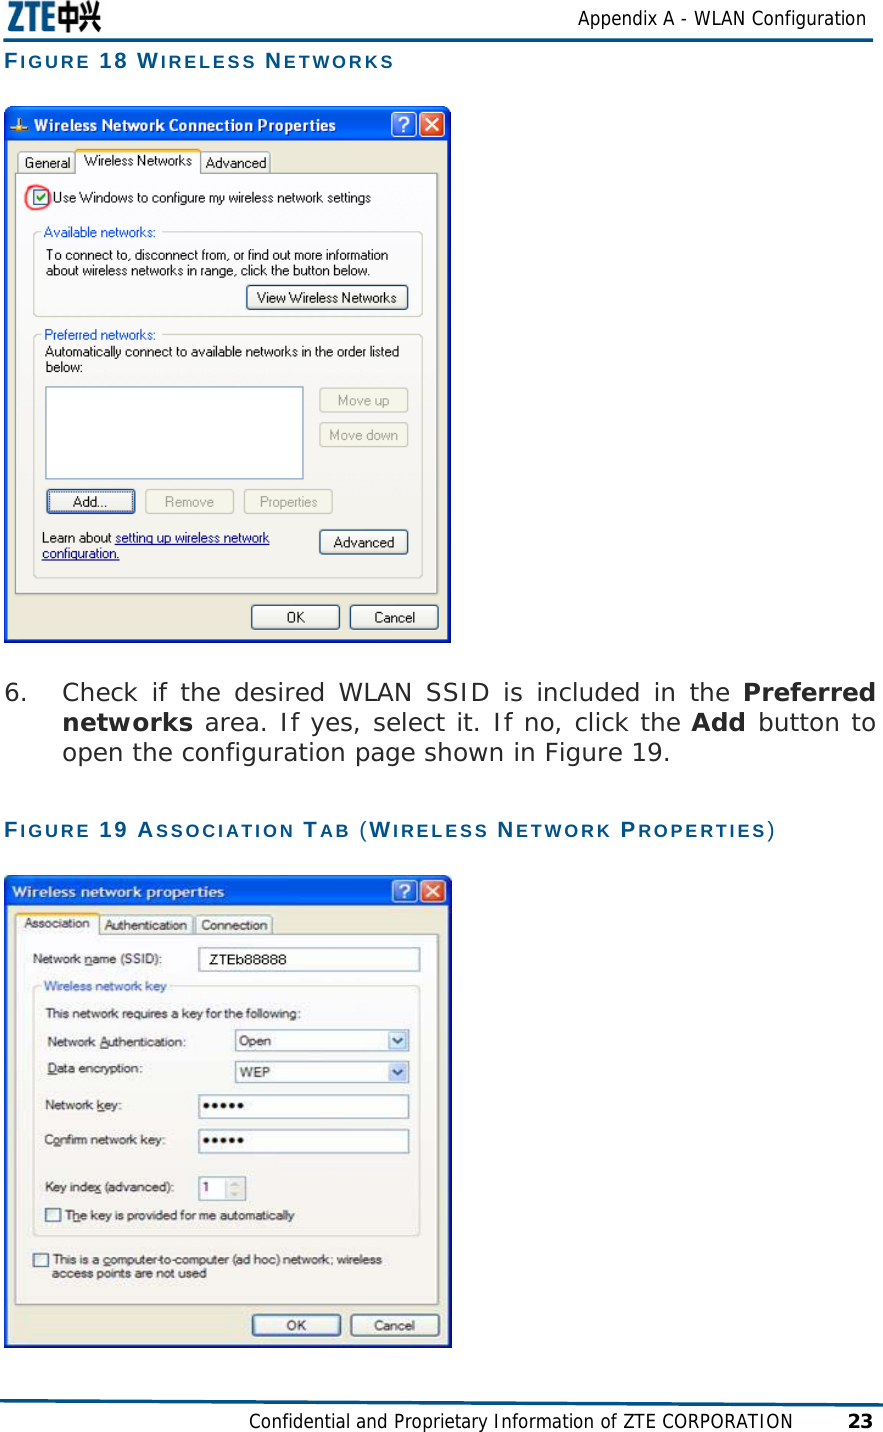  Appendix A - WLAN Configuration Confidential and Proprietary Information of ZTE CORPORATION 23 FIGURE 18 WIRELESS NETWORKS  6. Check if the desired WLAN SSID is included in the Preferred networks area. If yes, select it. If no, click the Add button to open the configuration page shown in Figure 19. FIGURE 19 ASSOCIATION TAB (WIRELESS NETWORK PROPERTIES)  